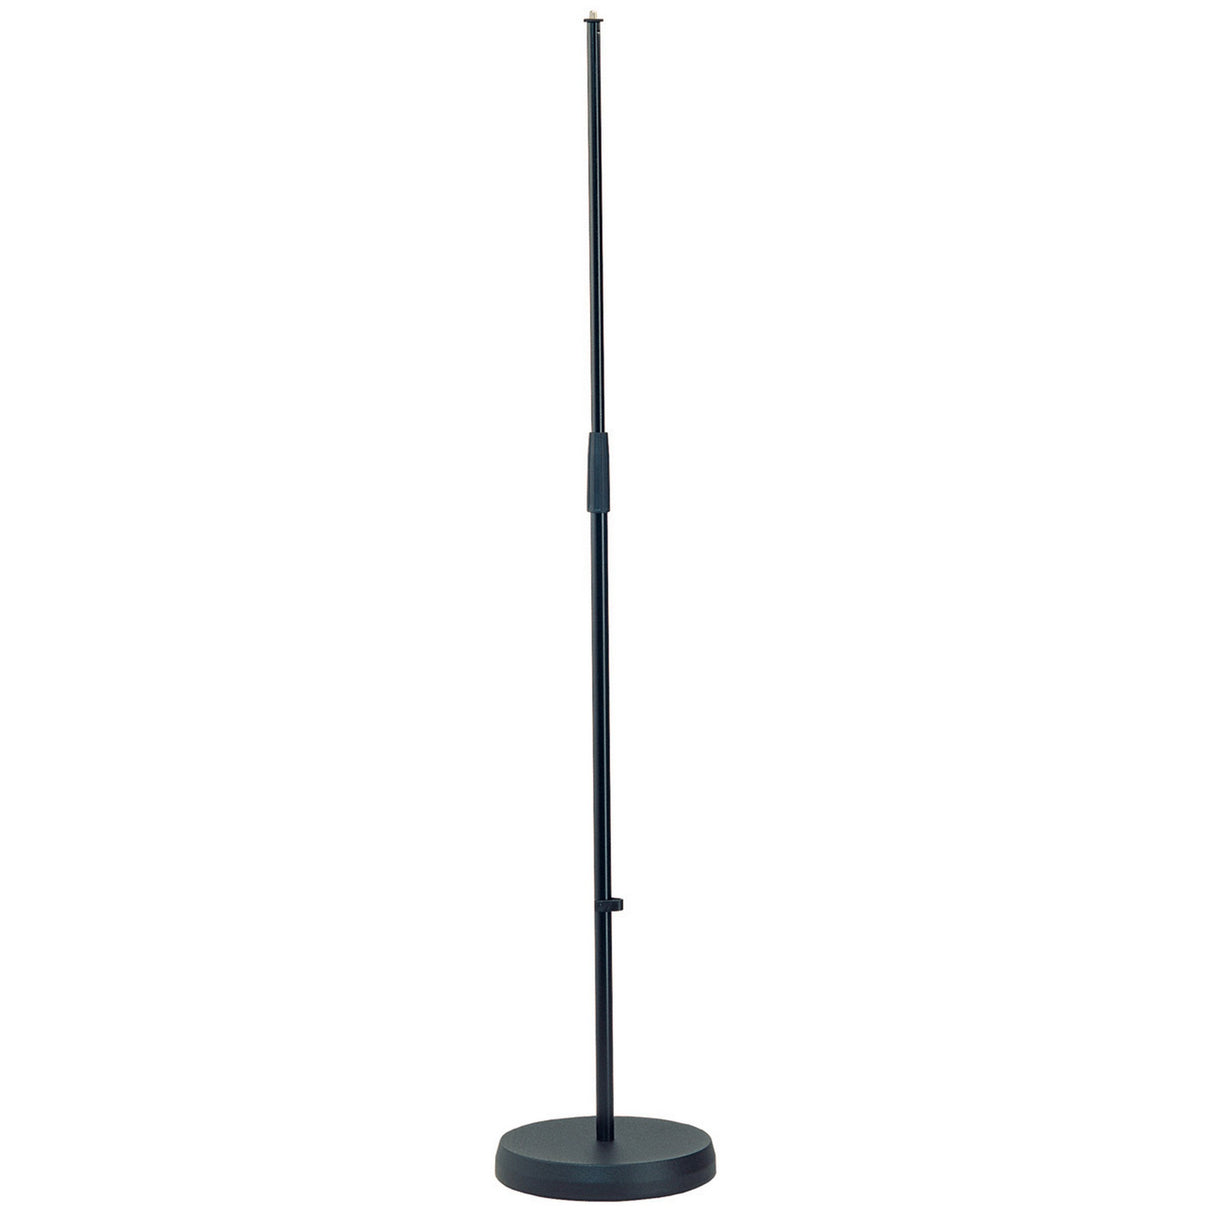 K&M 260 Microphone Stand with Ani-Vibration Rubber Insert, Black